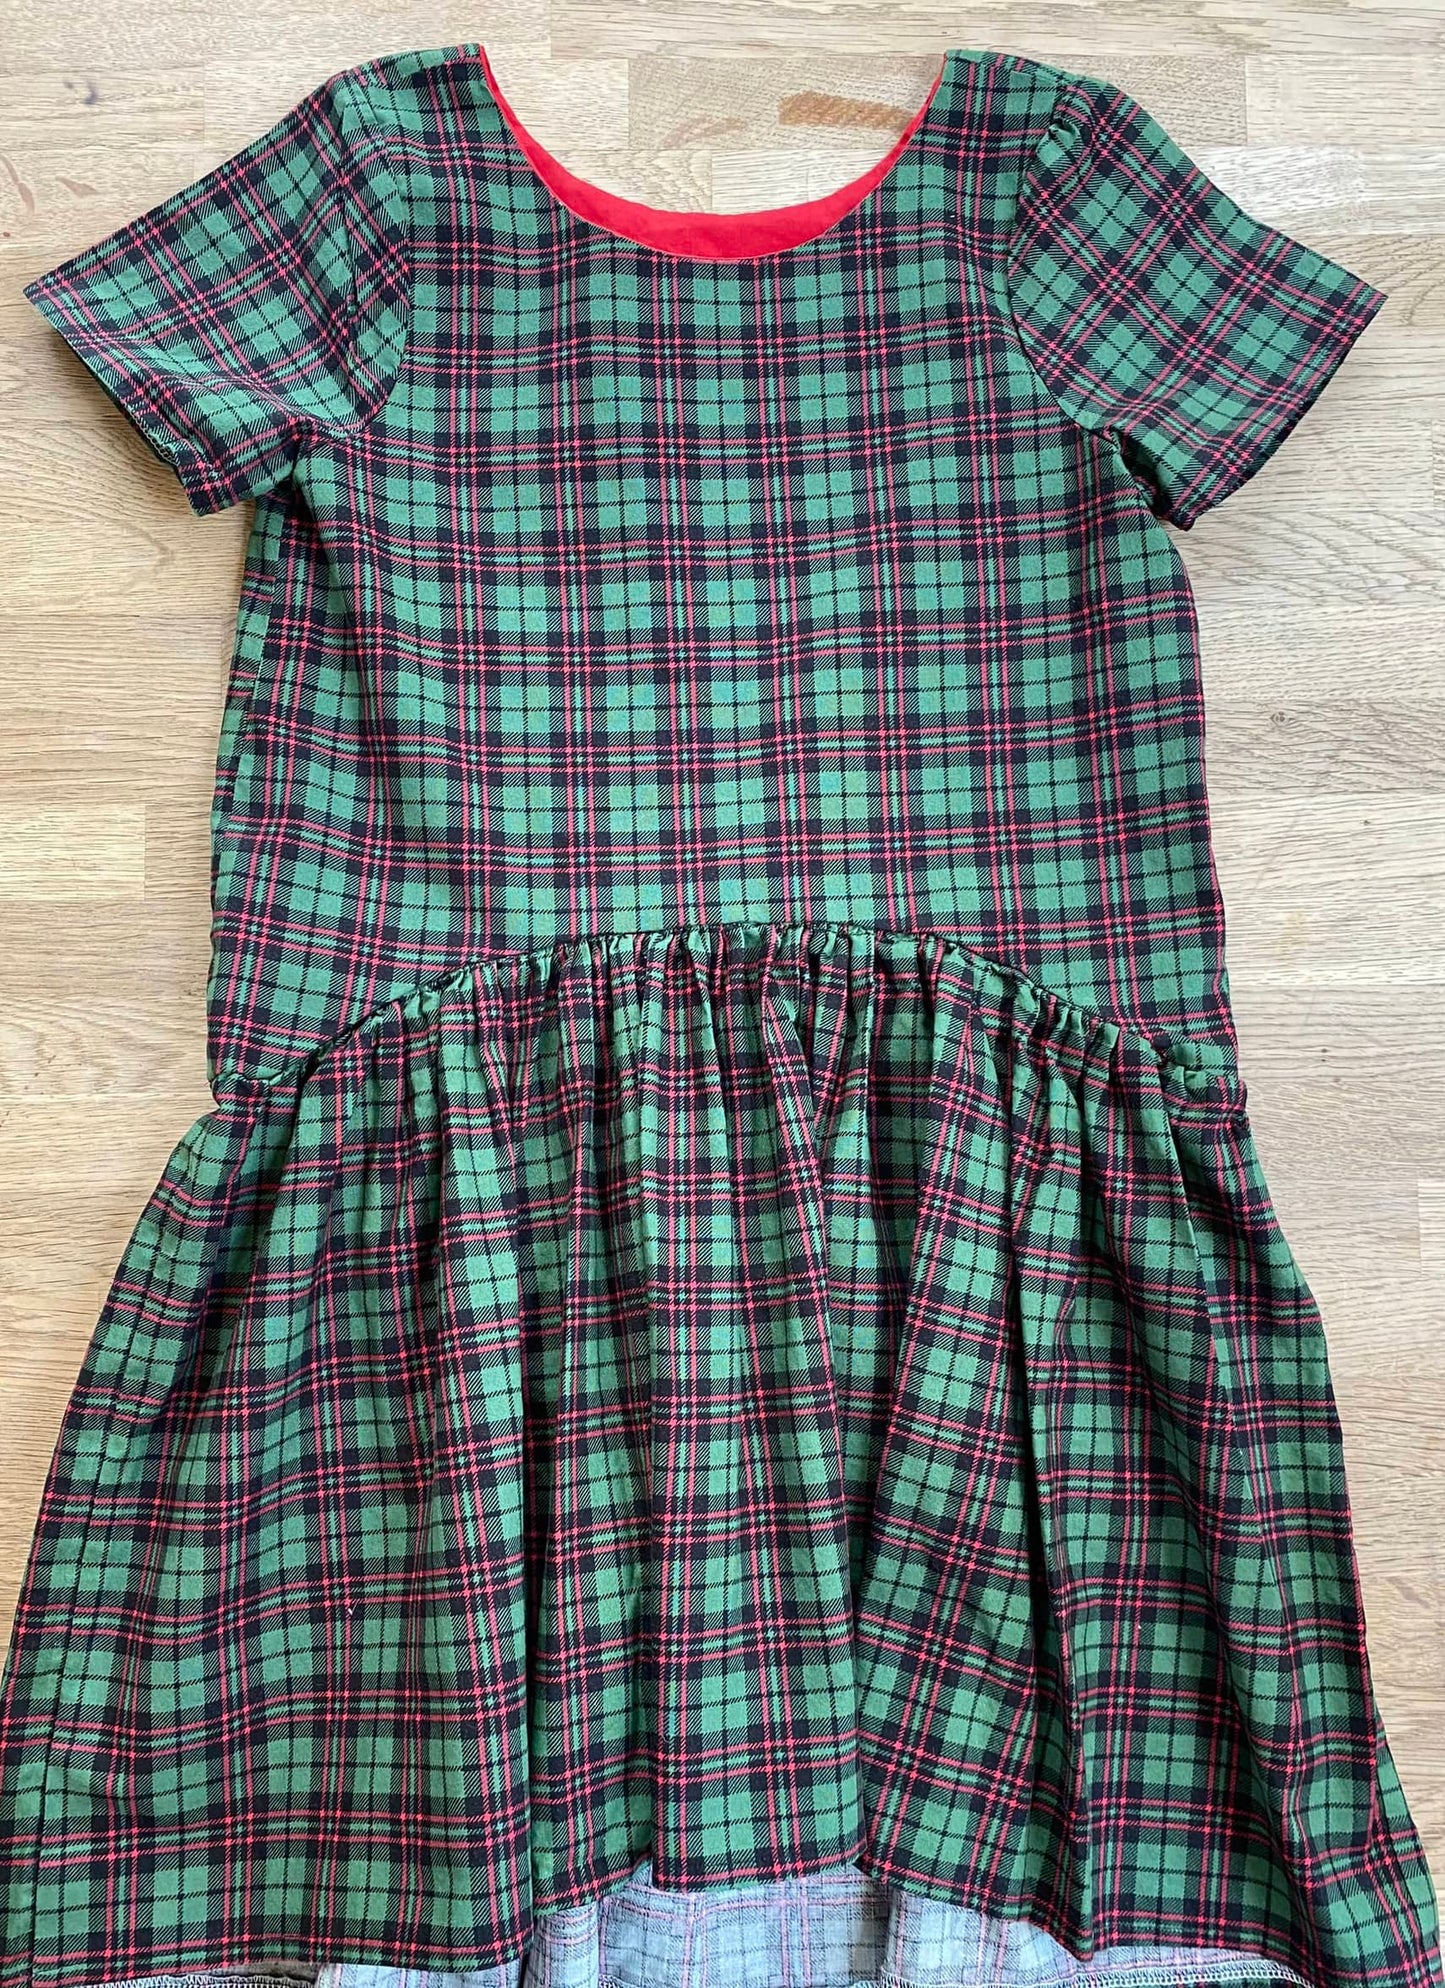 Green Plaid Dress with High-Low Dress (Pre-Loved) Size 10